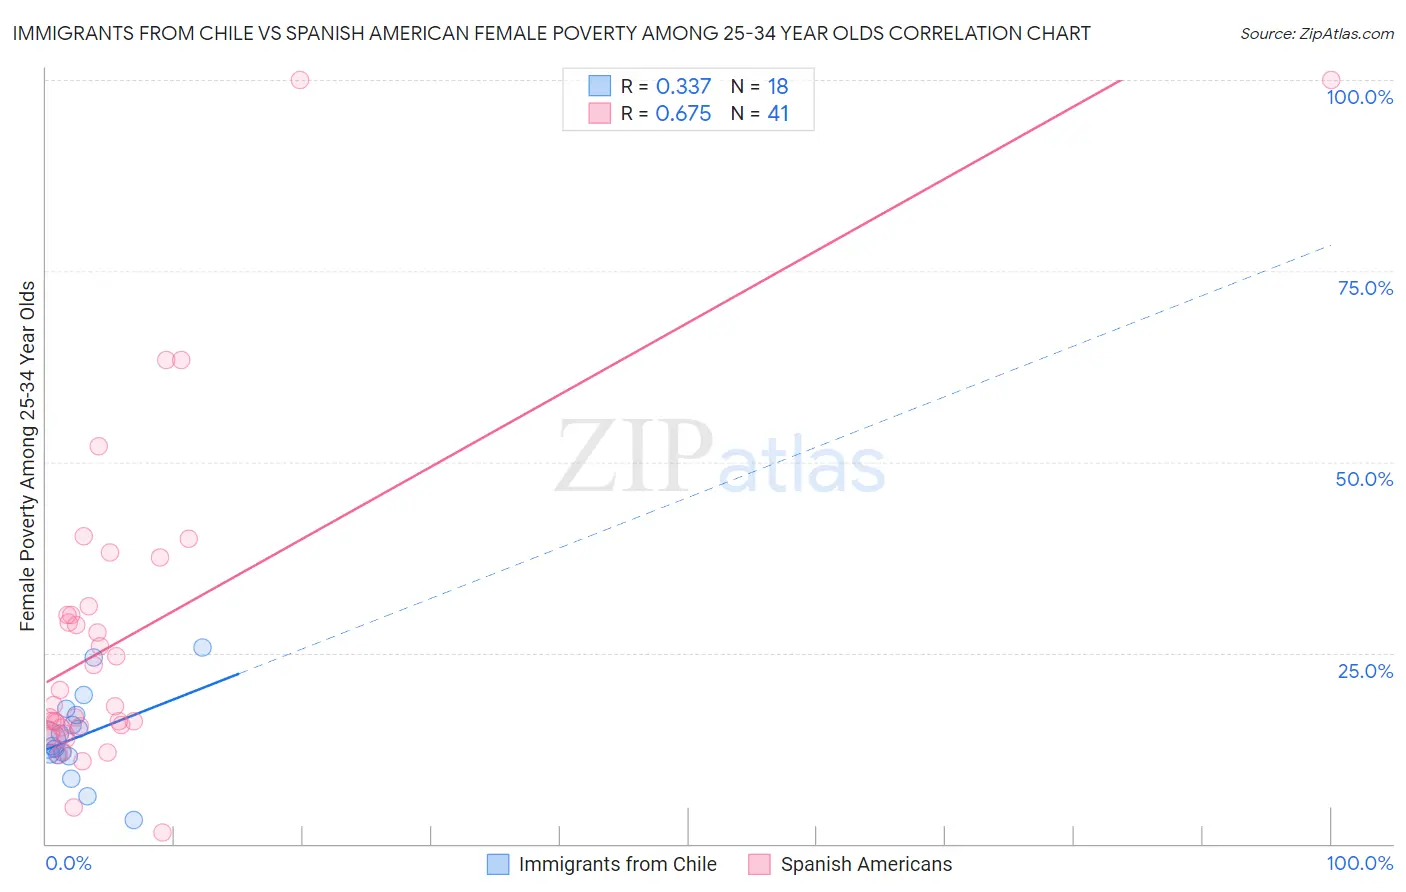 Immigrants from Chile vs Spanish American Female Poverty Among 25-34 Year Olds